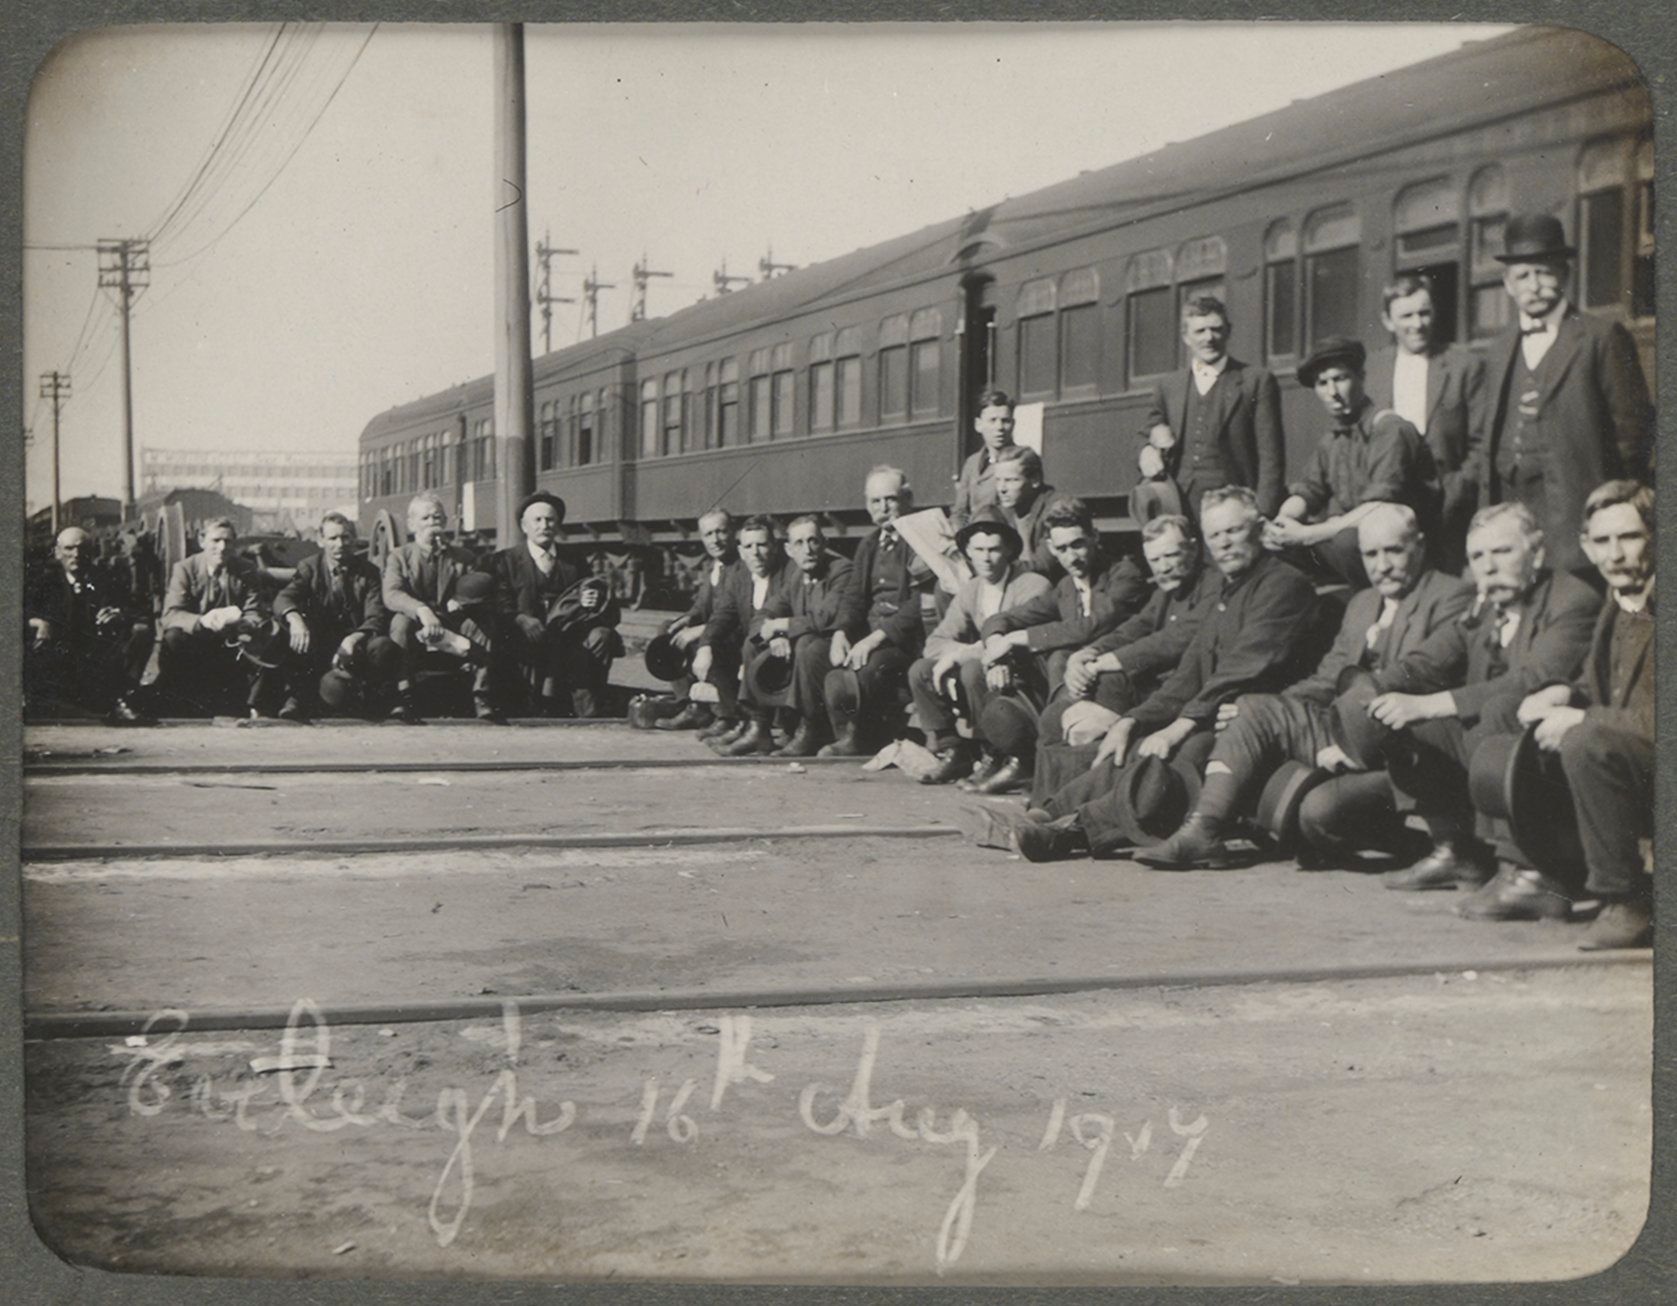 Men crouch in front of a train carriage at the Eveleigh Workshops in 1917